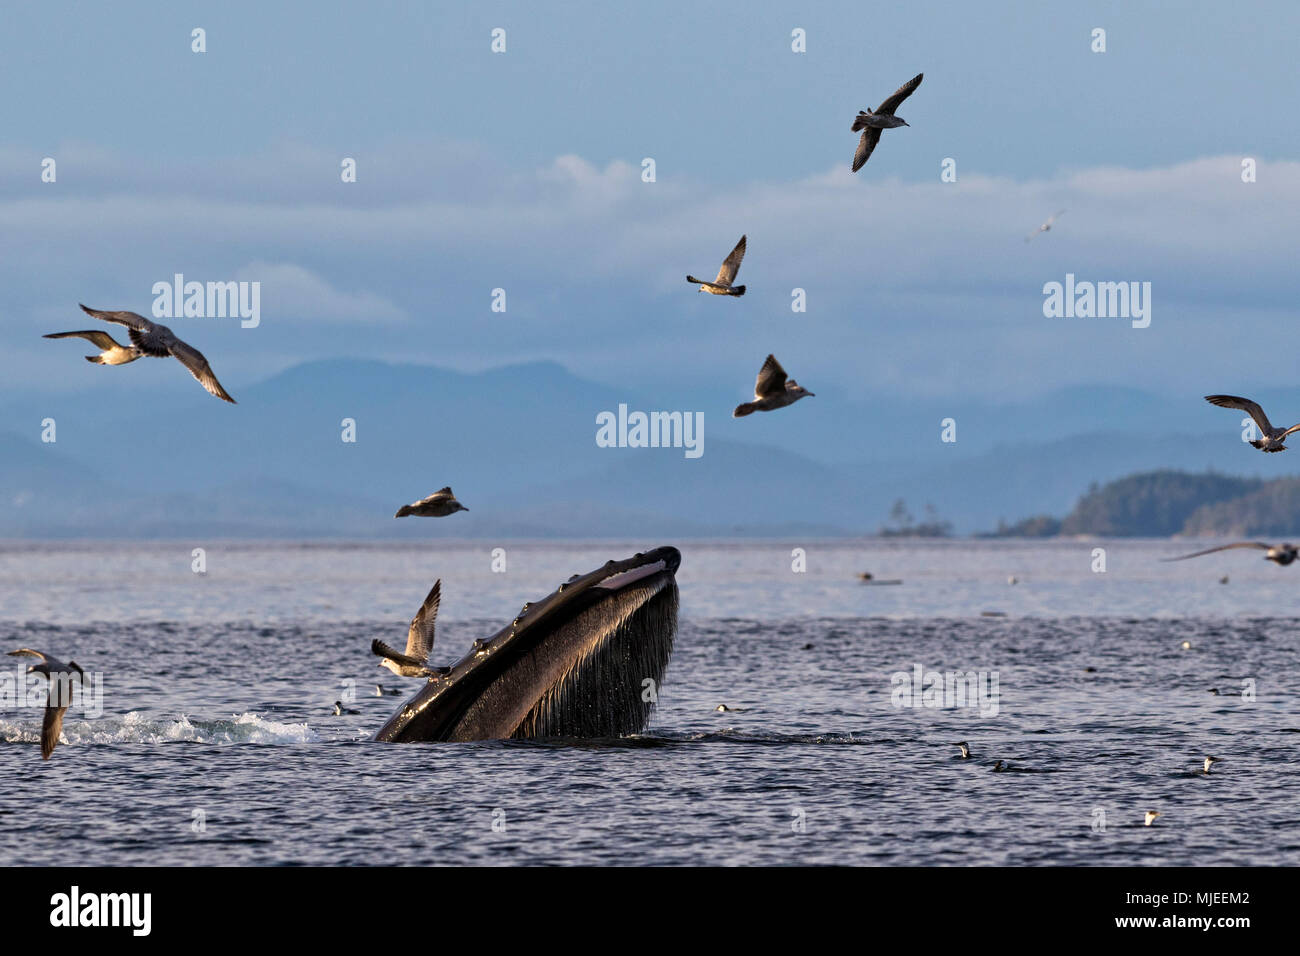 Humpback whale (Megaptera novaengliae) trap feeding in front of the British Columbia Coastal Mountains in Queen Charlotte Strait off Vancouver Island, British Columbia, Canada. Stock Photo